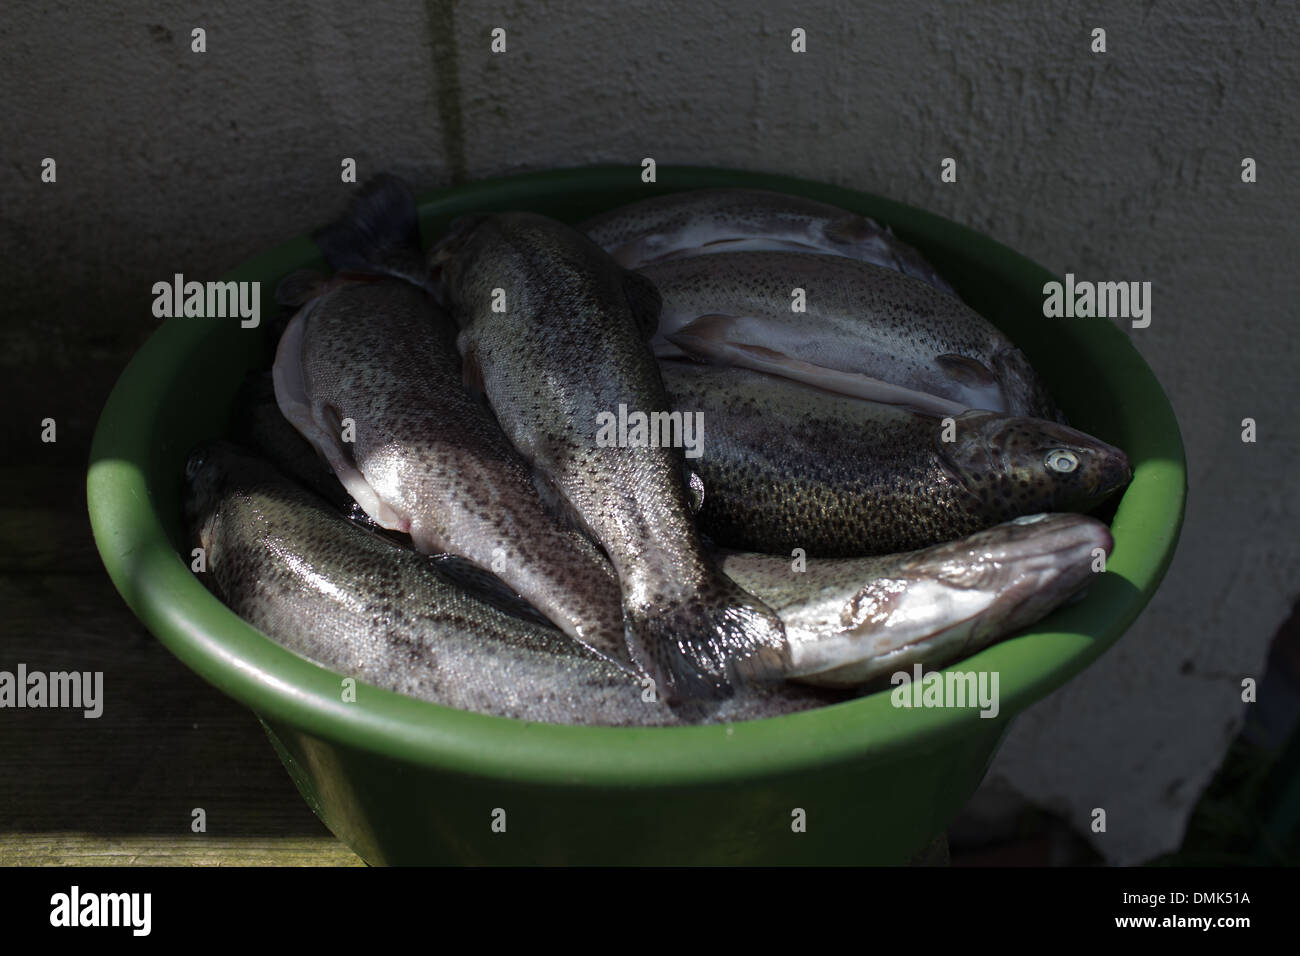 Preparation smoked trout in Polish cuisine conditions. Stock Photo